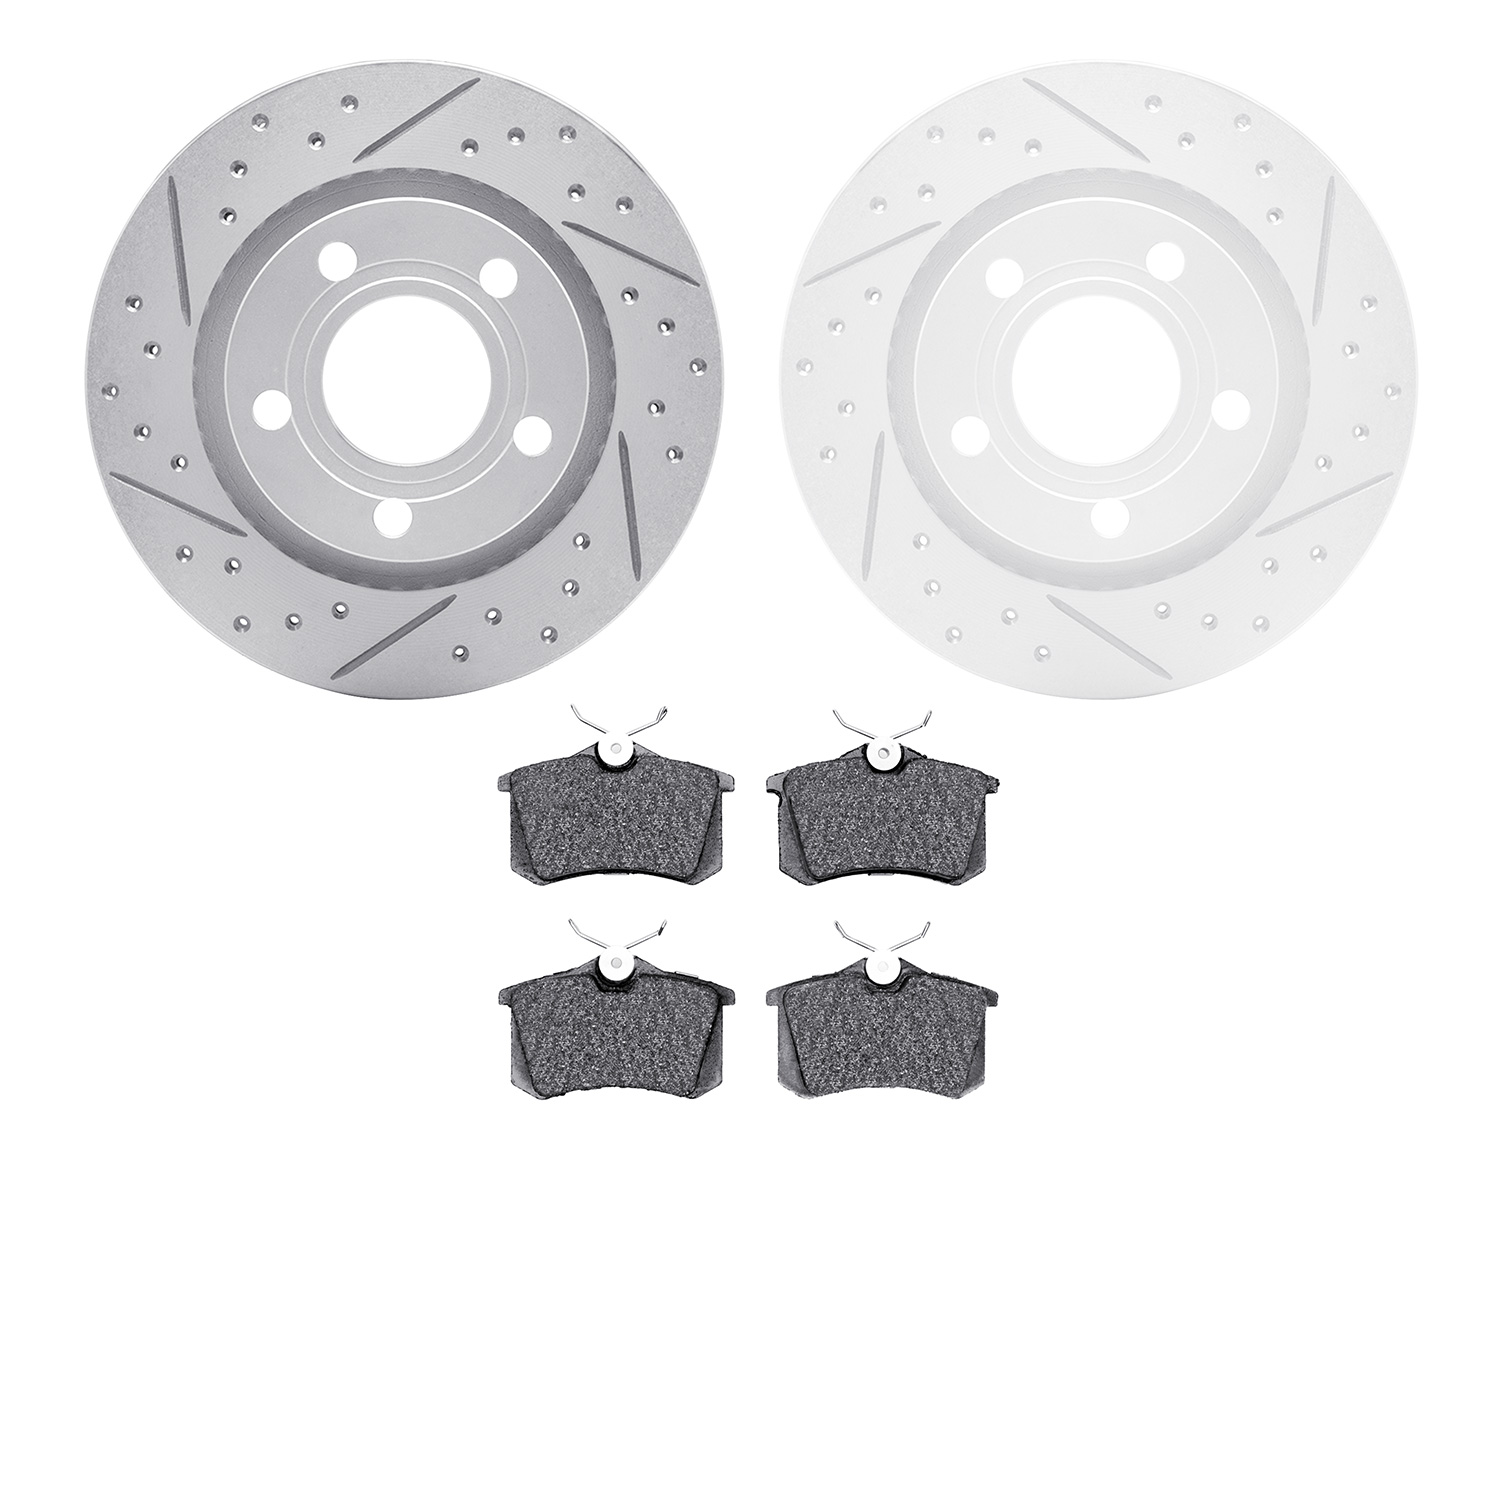 2502-74031 Geoperformance Drilled/Slotted Rotors w/5000 Advanced Brake Pads Kit, 1999-2004 Audi/Volkswagen, Position: Rear